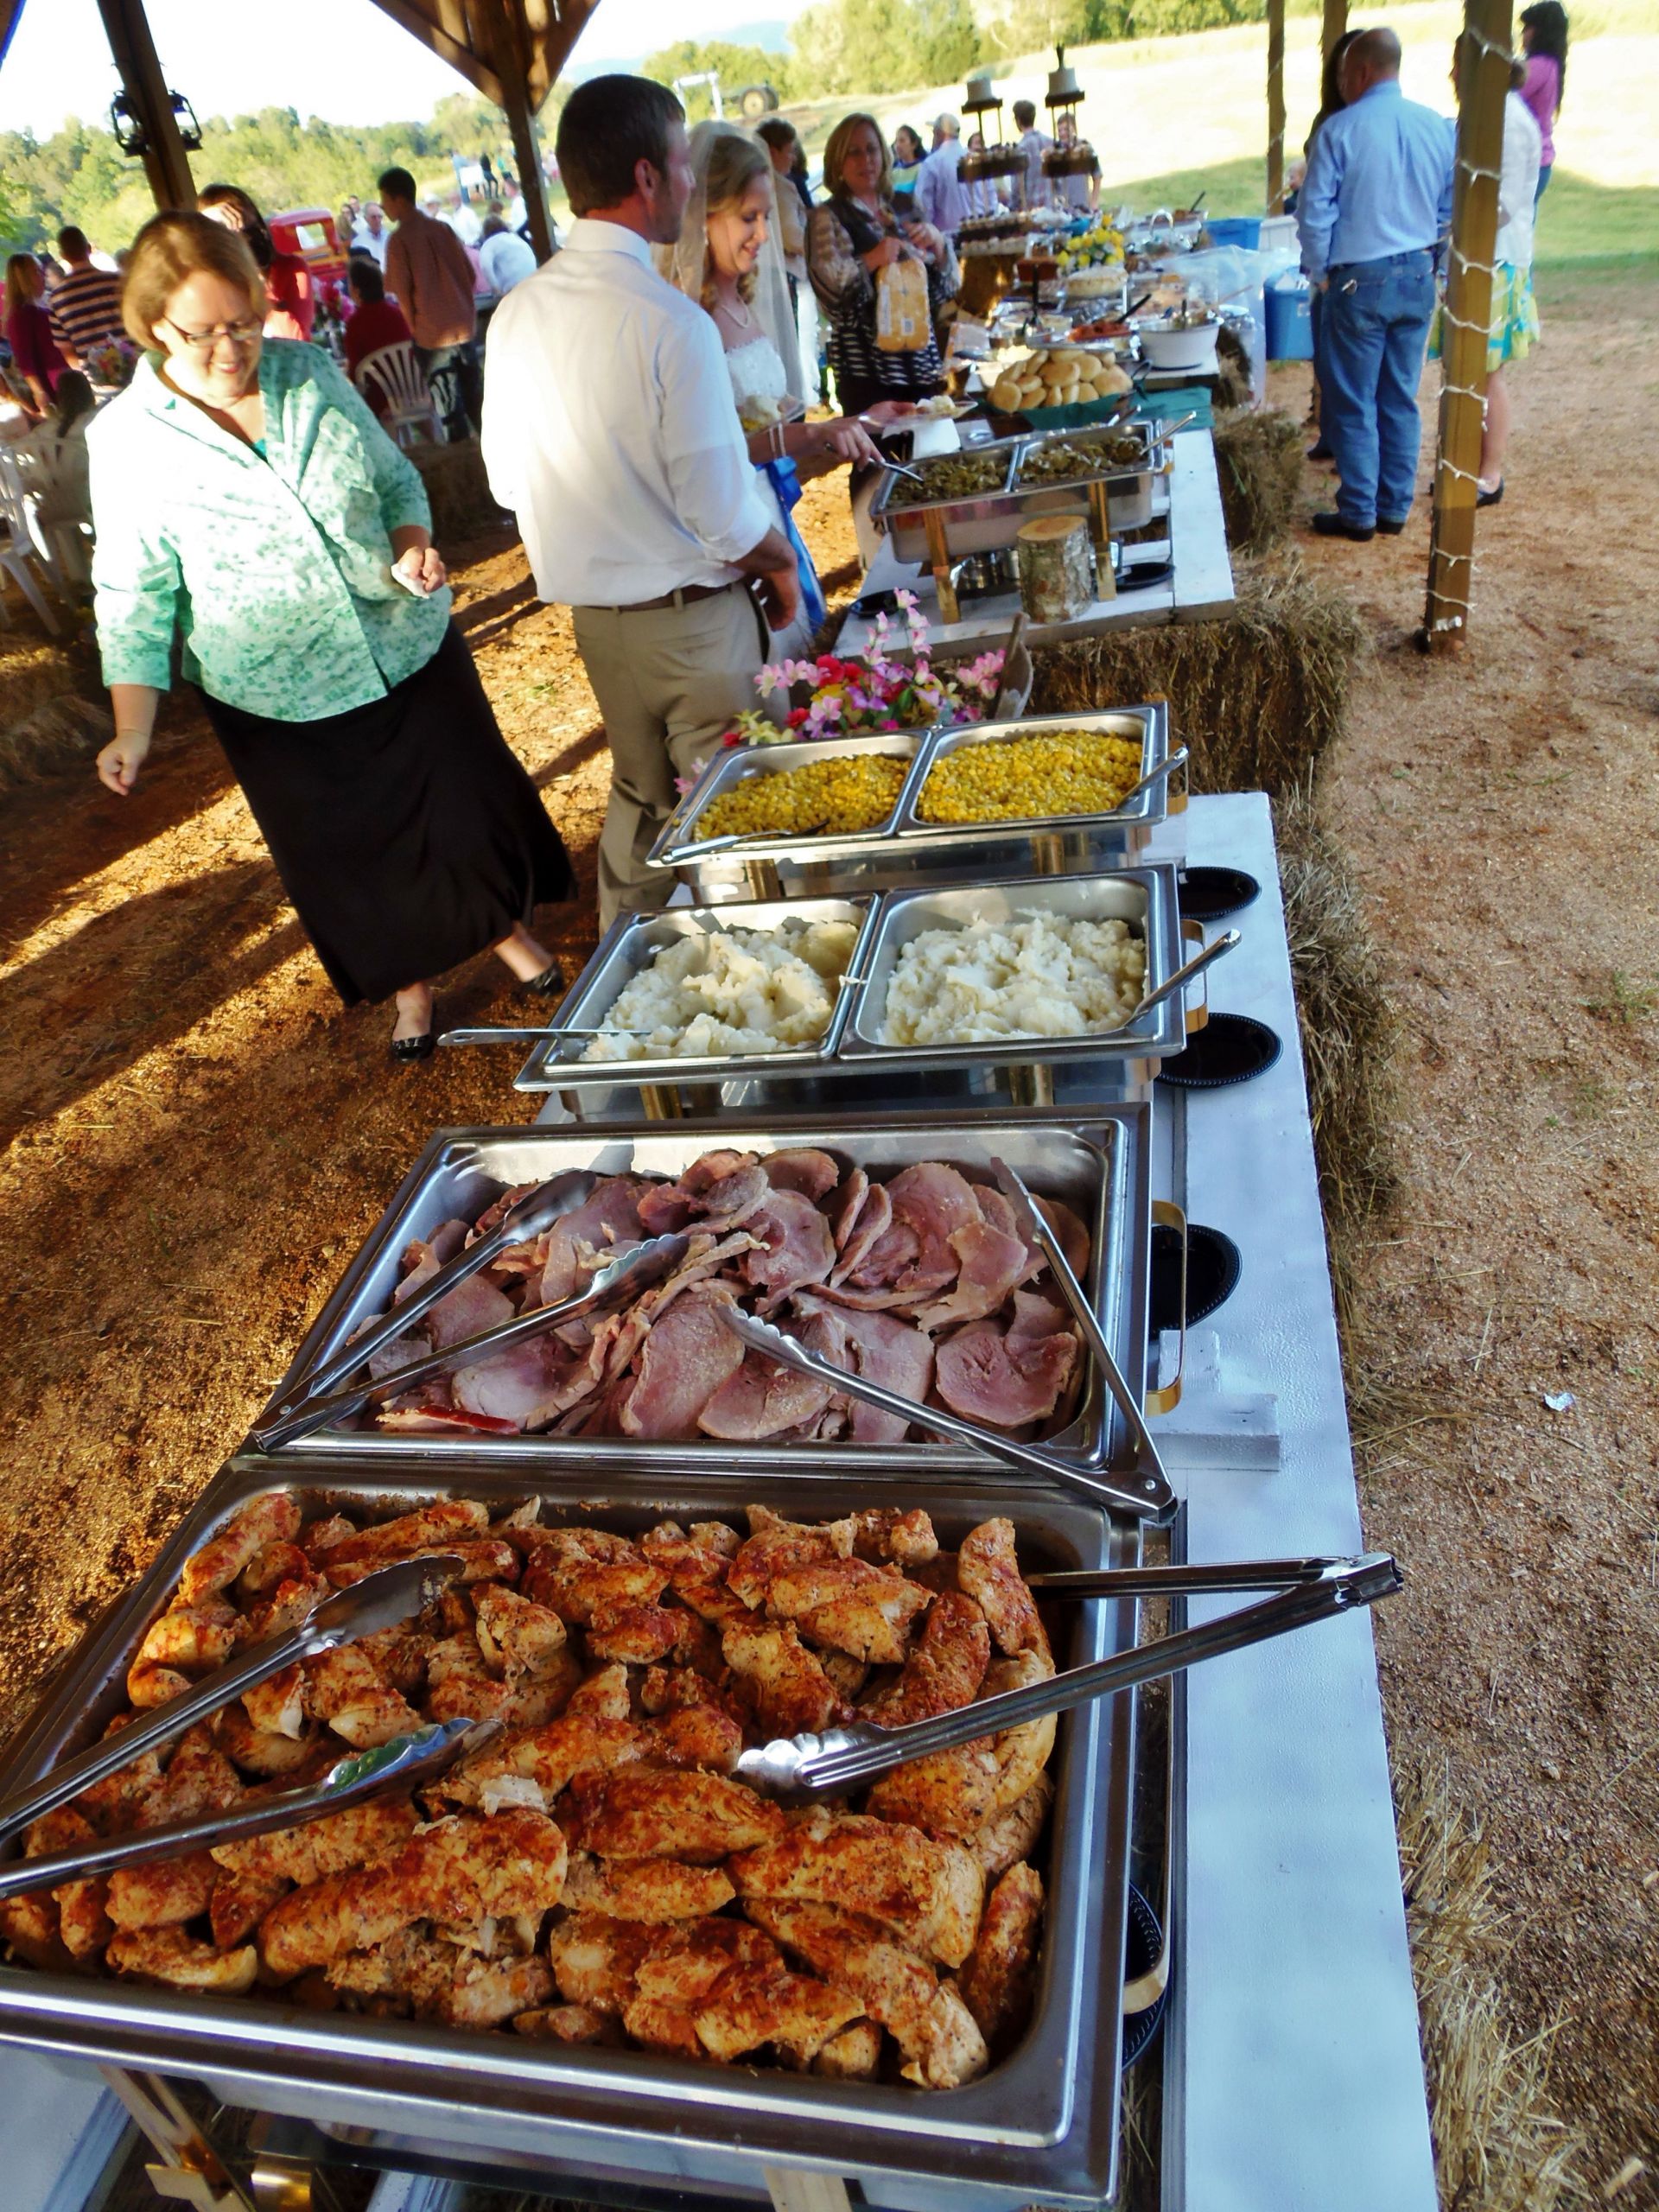 Summer Party Buffet Menu Ideas
 Buffet for outdoor country wedding chicken ham mashed